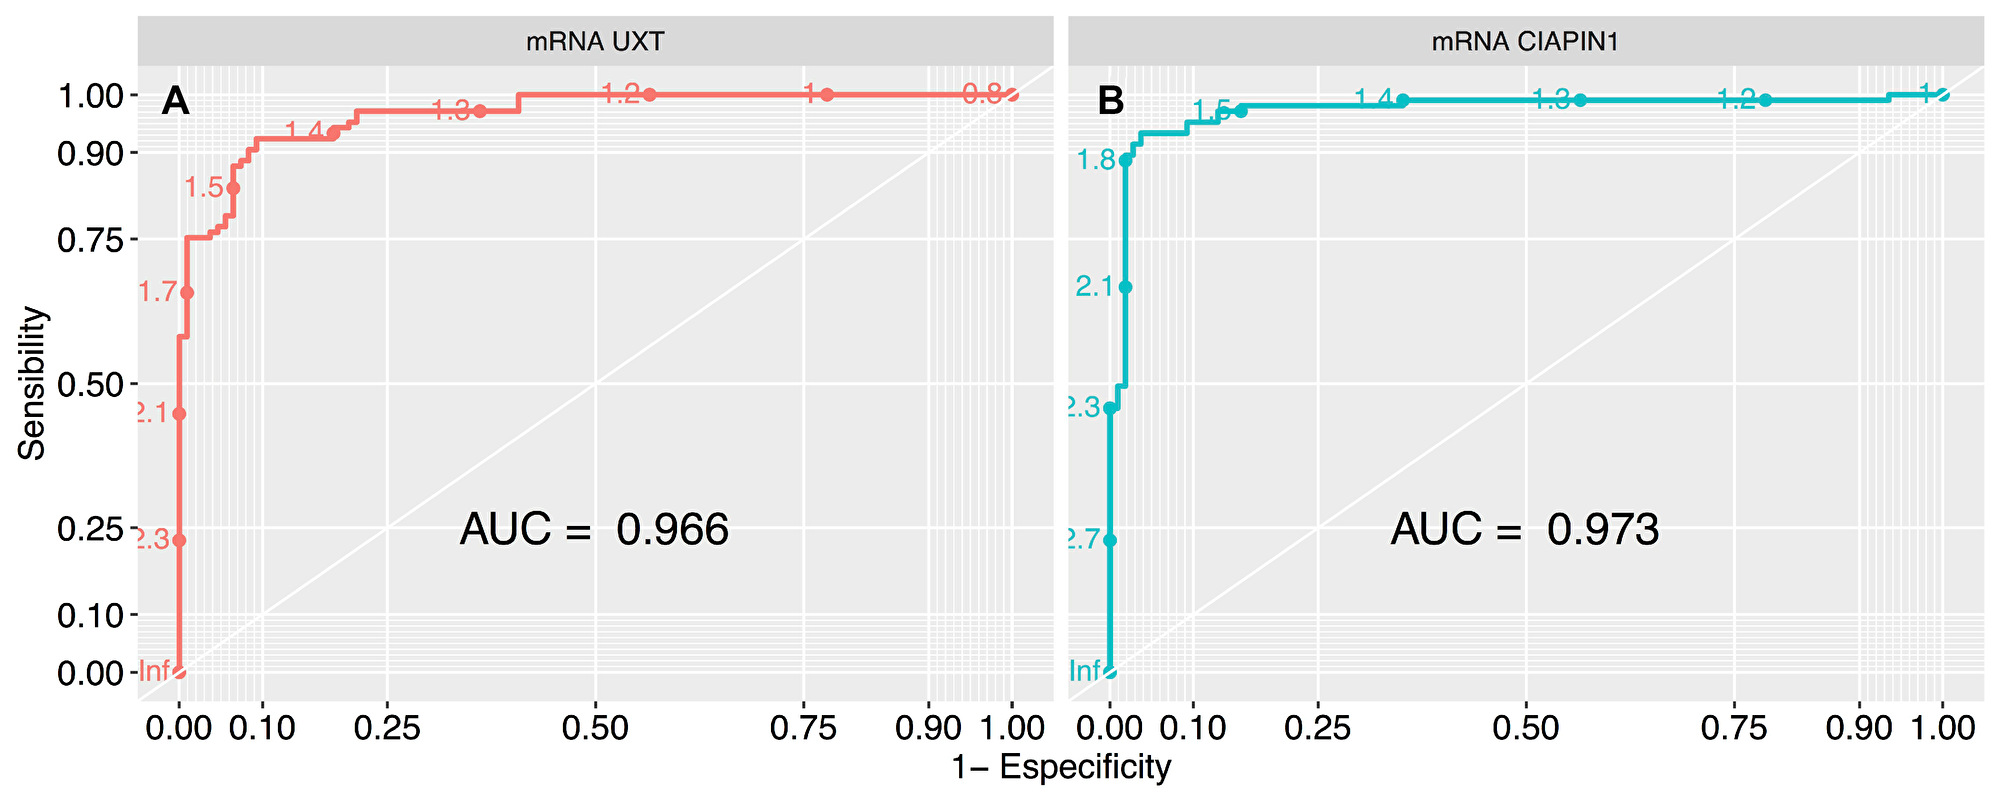 ROC curve analysis to define the cut-off values of UXT and CIAPIN1 gene expression, segregating the high and low expression groups.